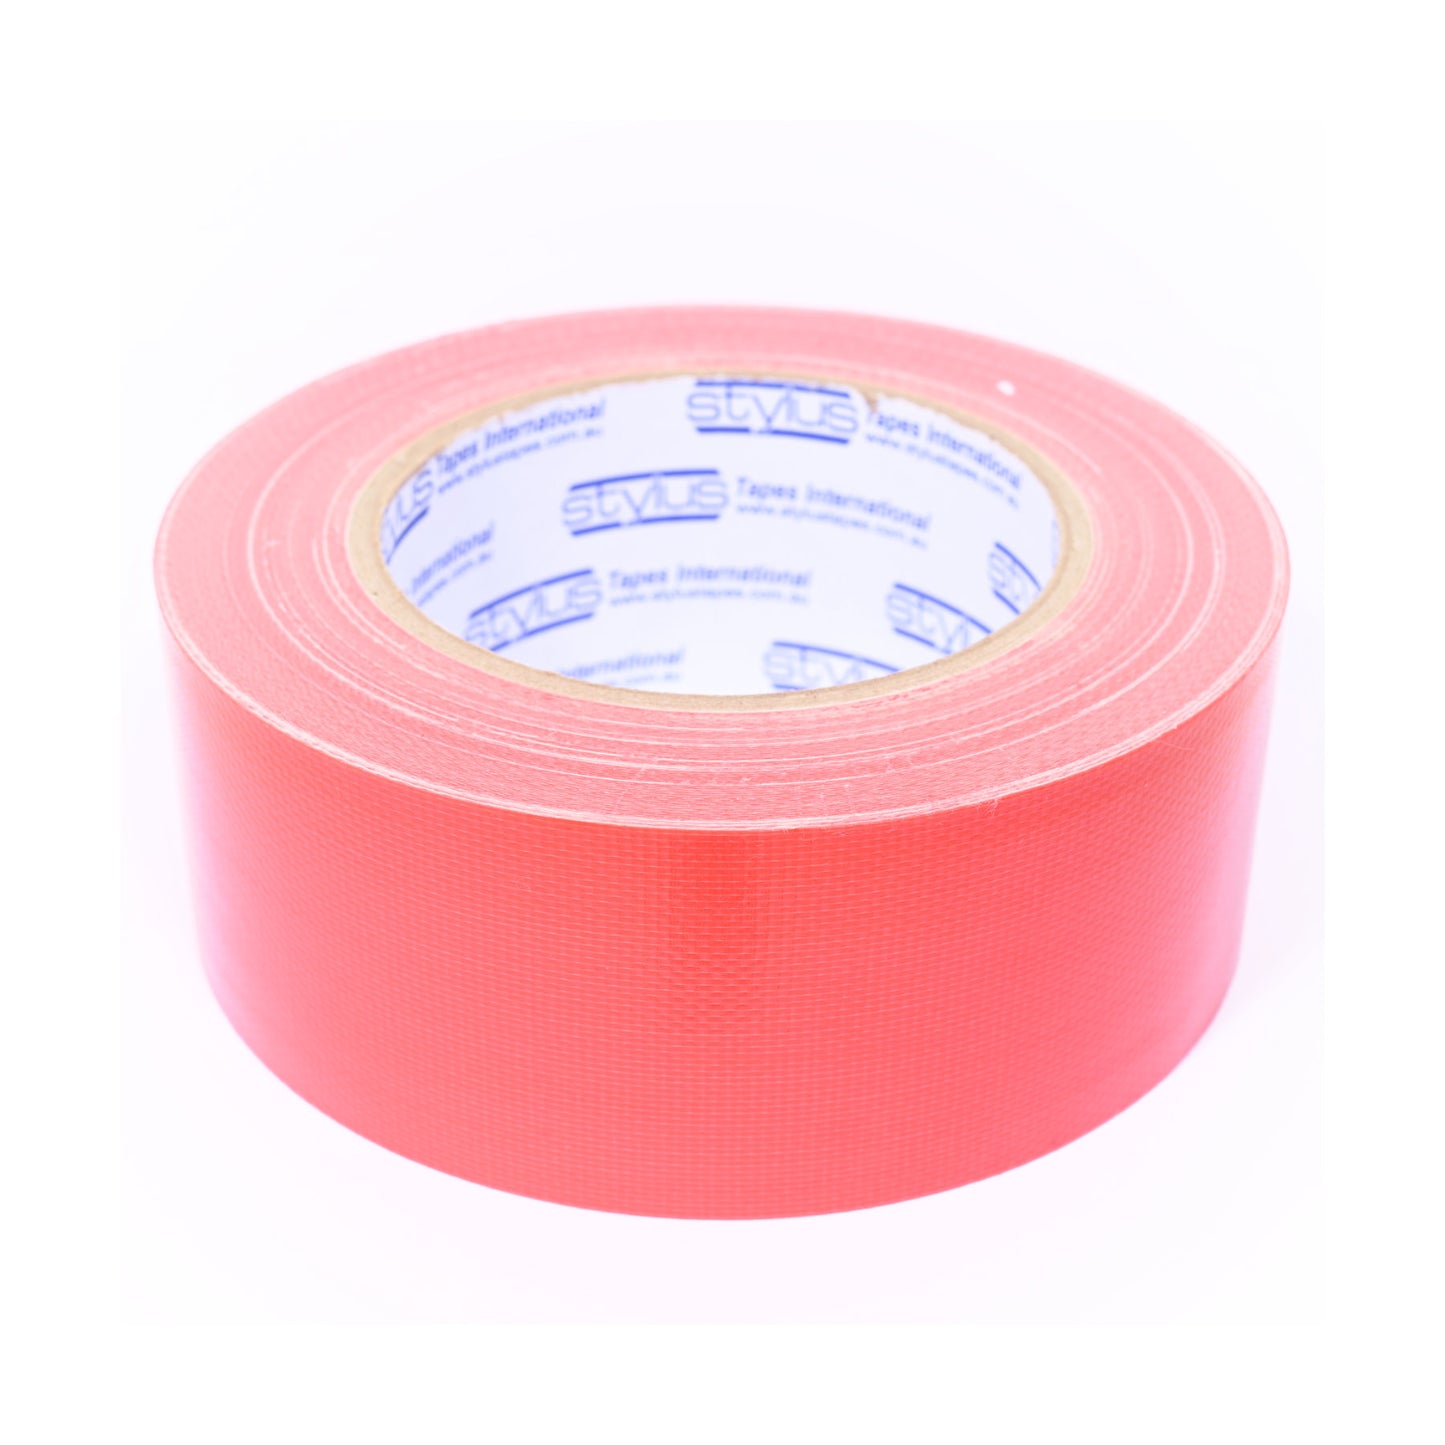 Stylus 370 General Purpose Gaffer Tape (Select Size/Colour)